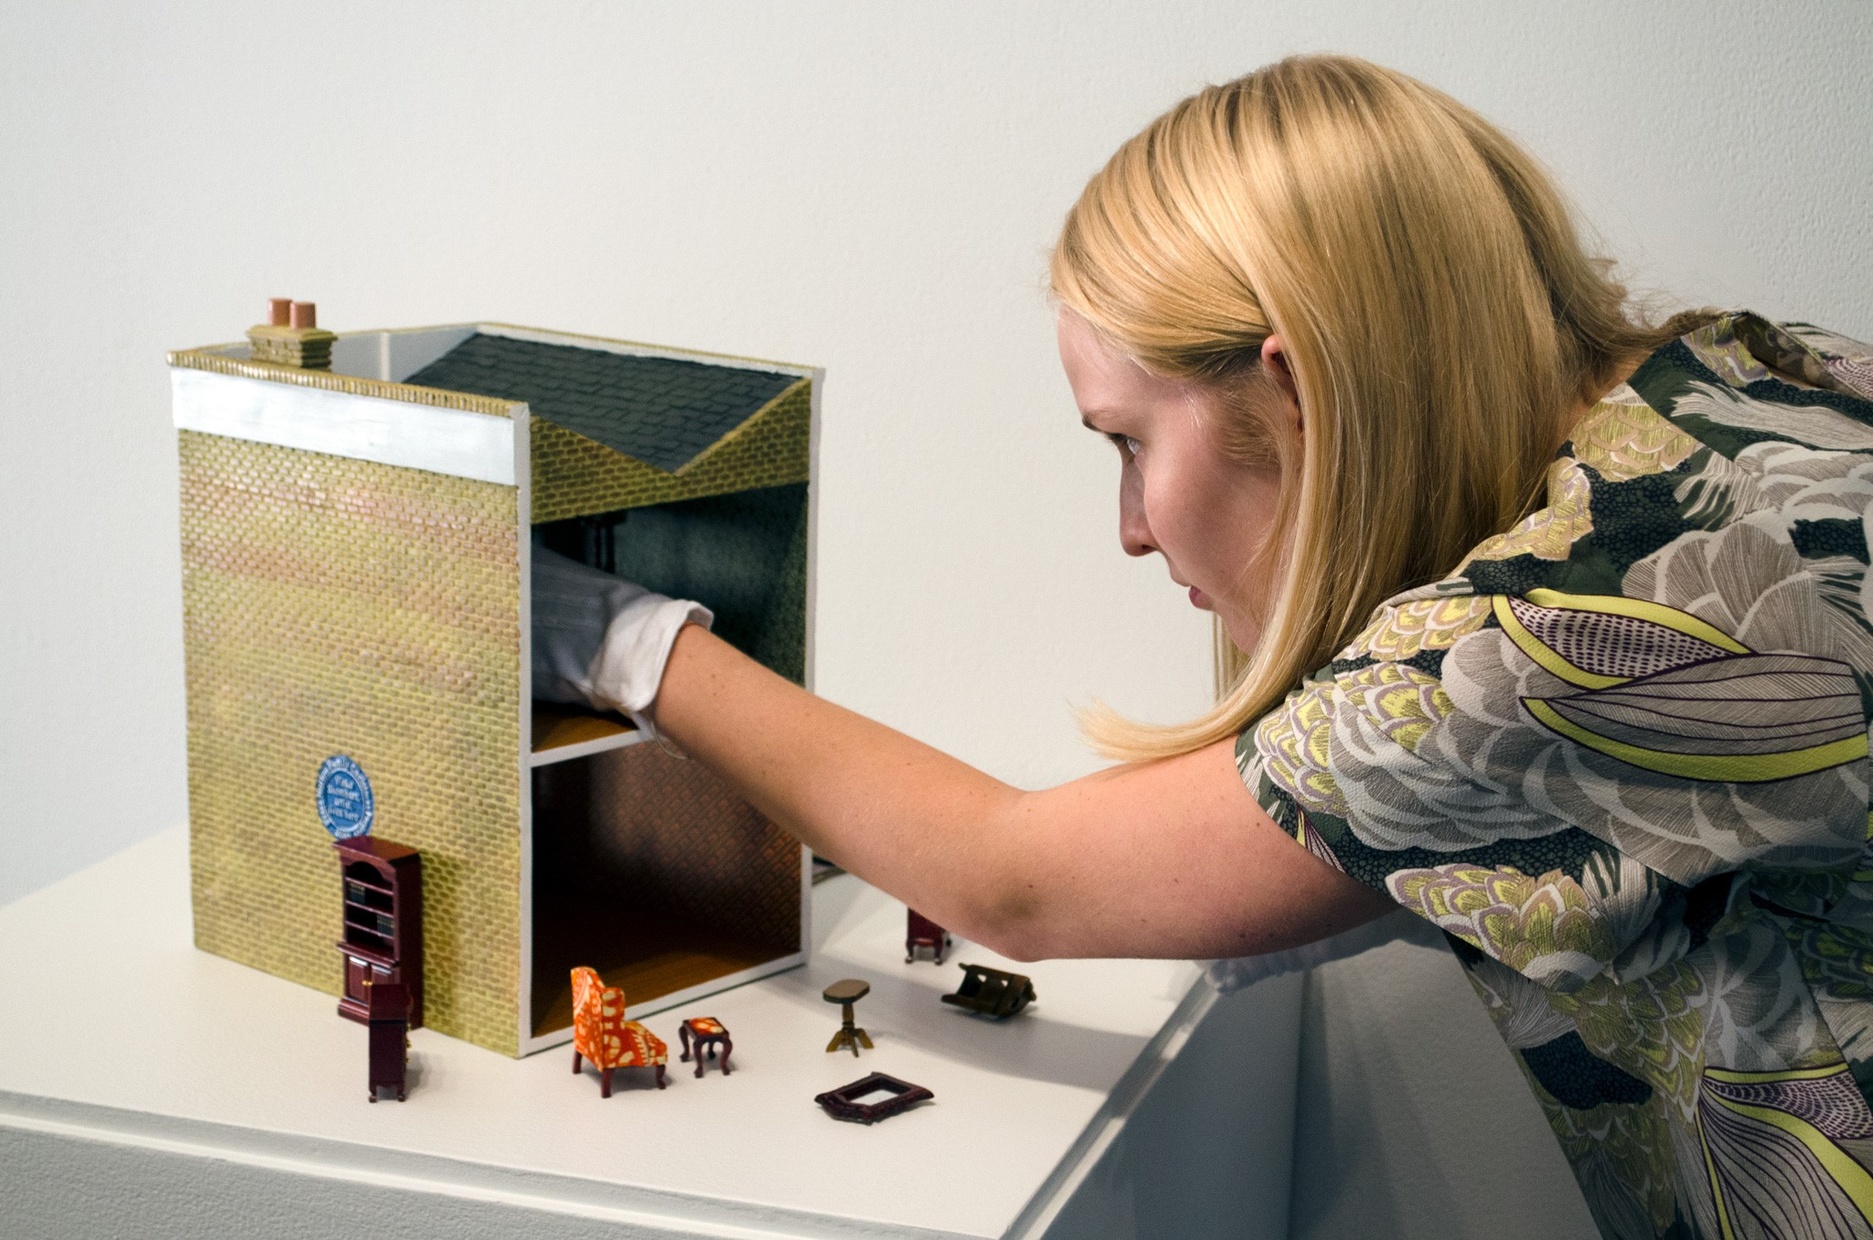 A woman installs tiny furniture into an artwork that looks like a dollhouse.